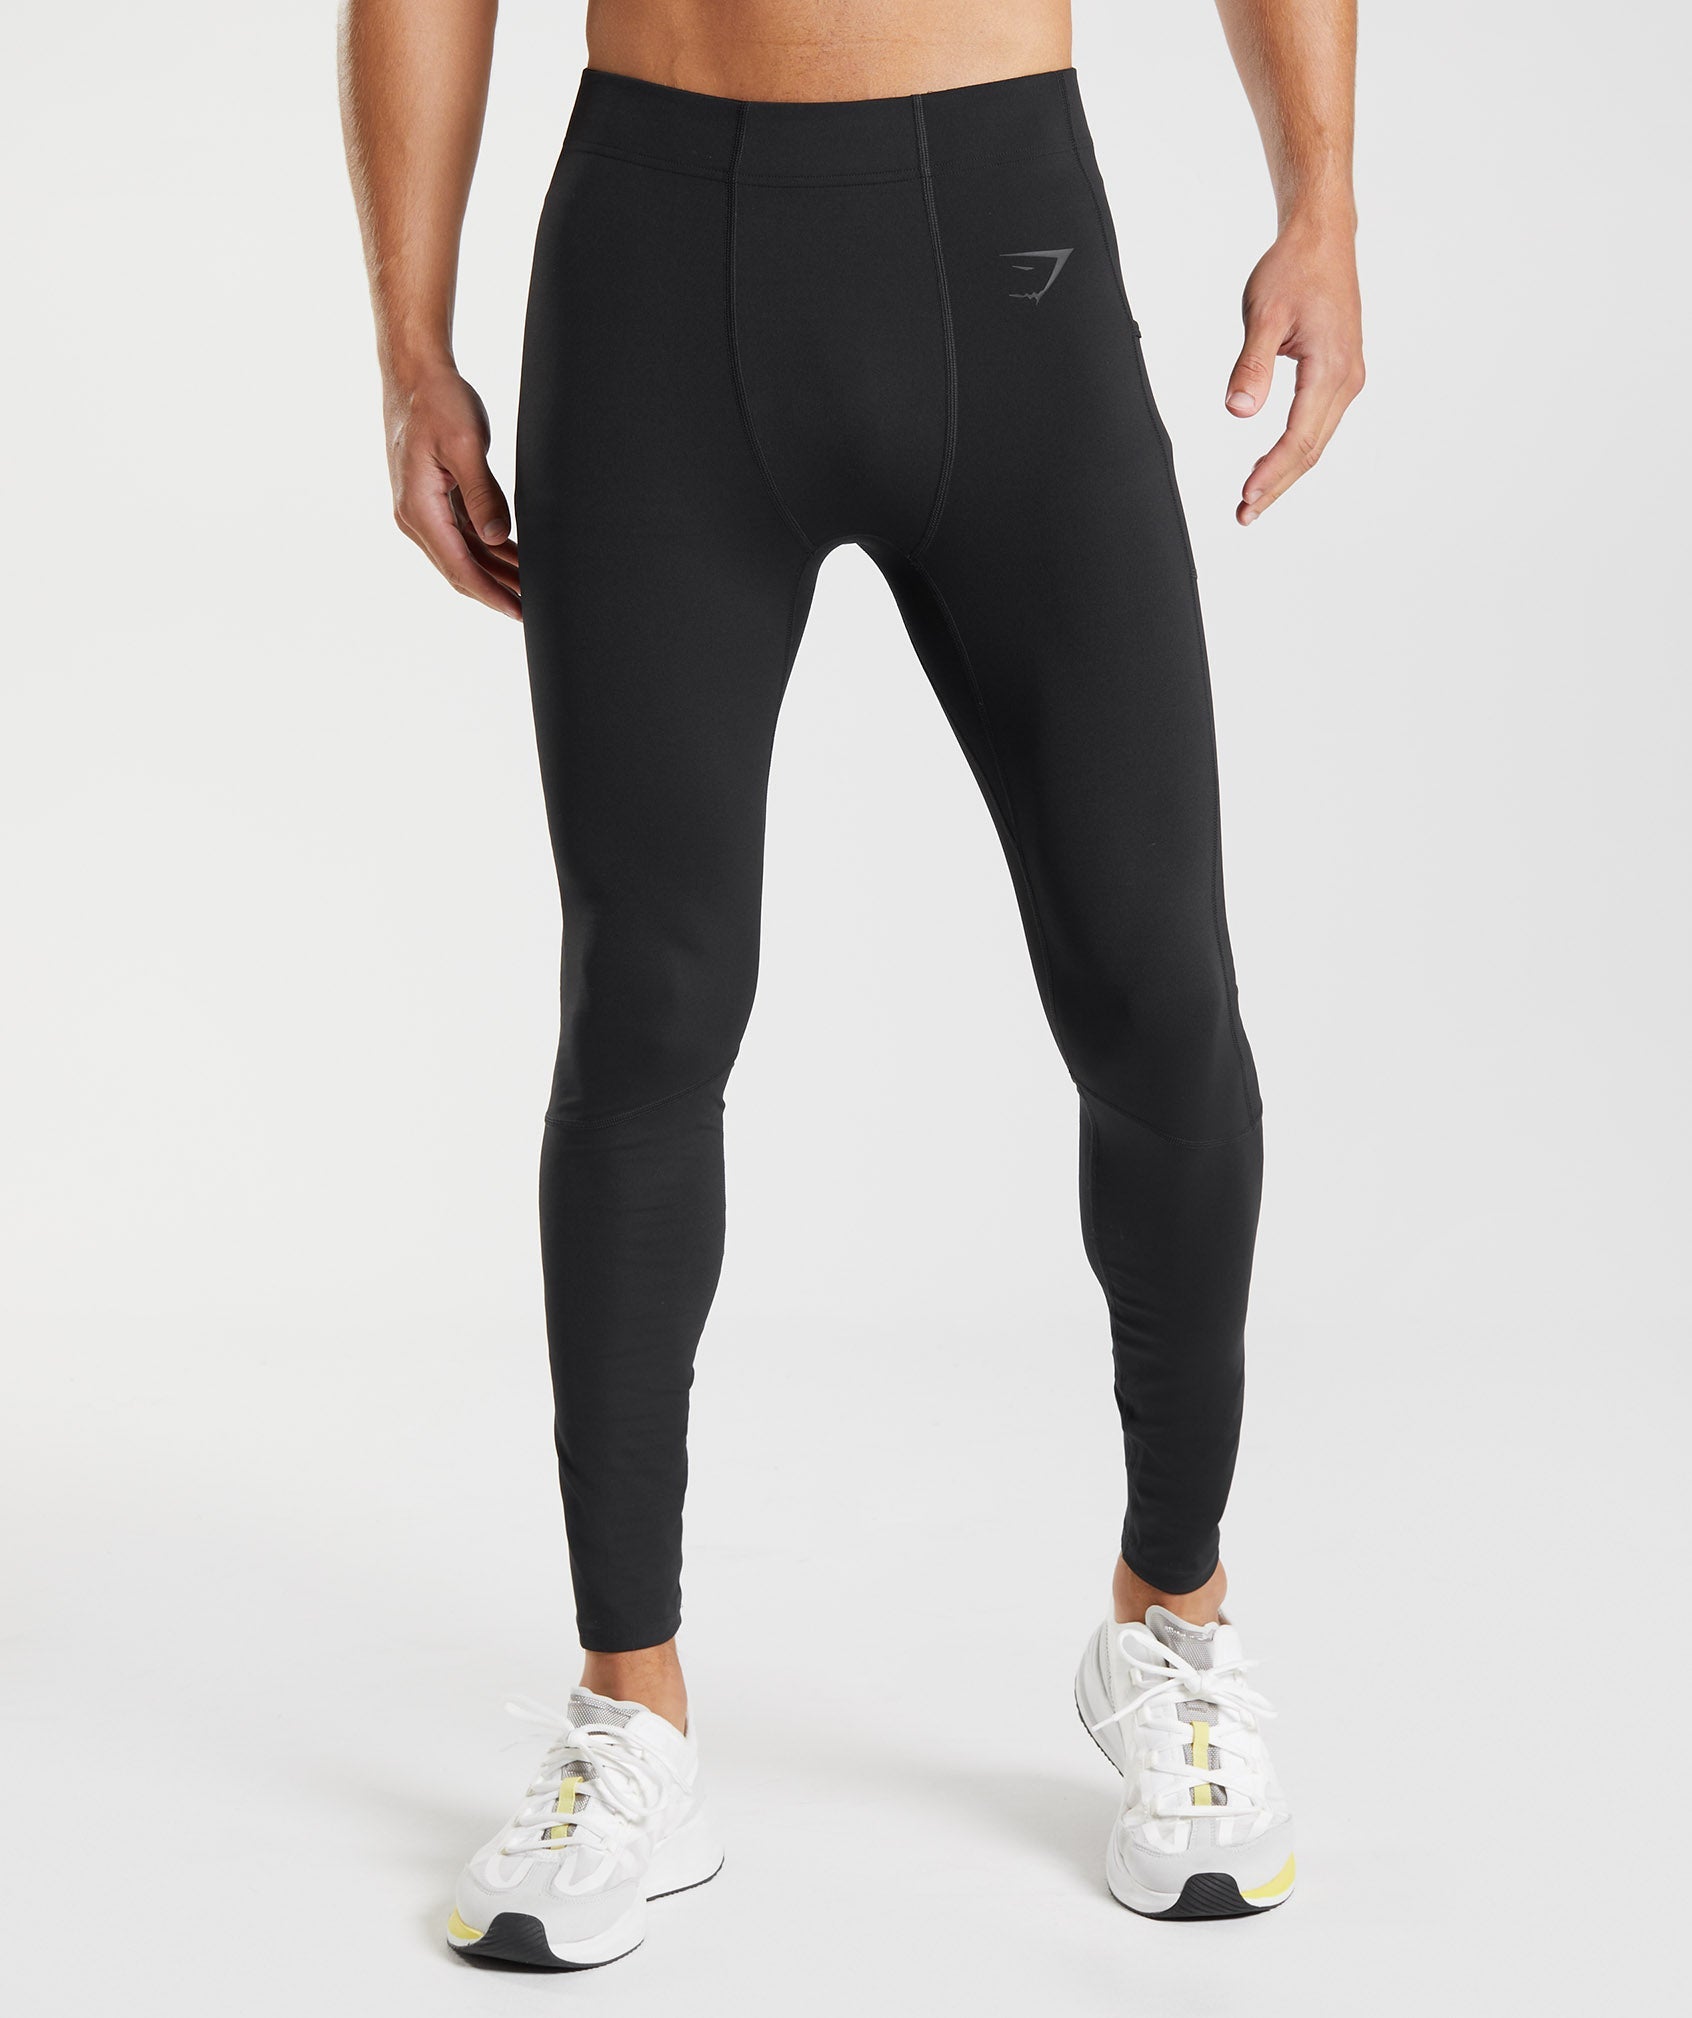 Do compression clothes, such as running tights, have any benefits for men  who work out at the gym? - Quora